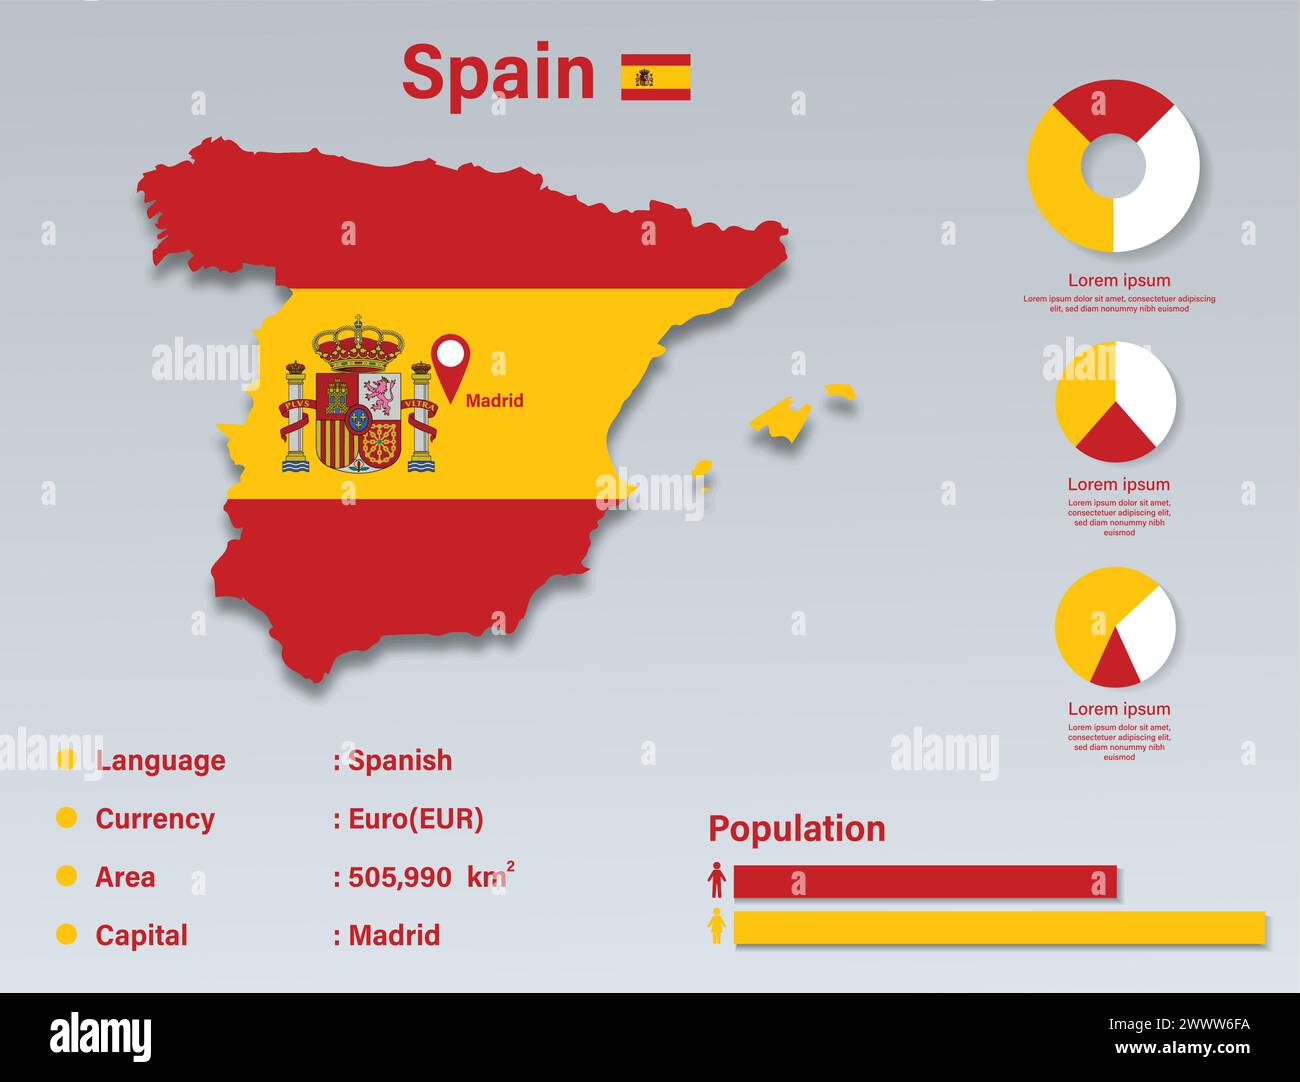 Spain Infographic Vector Illustration, Spain Statistical Data Element, Spain Information Board With Flag Map, Spain Map Flag Flat Design Stock Vector